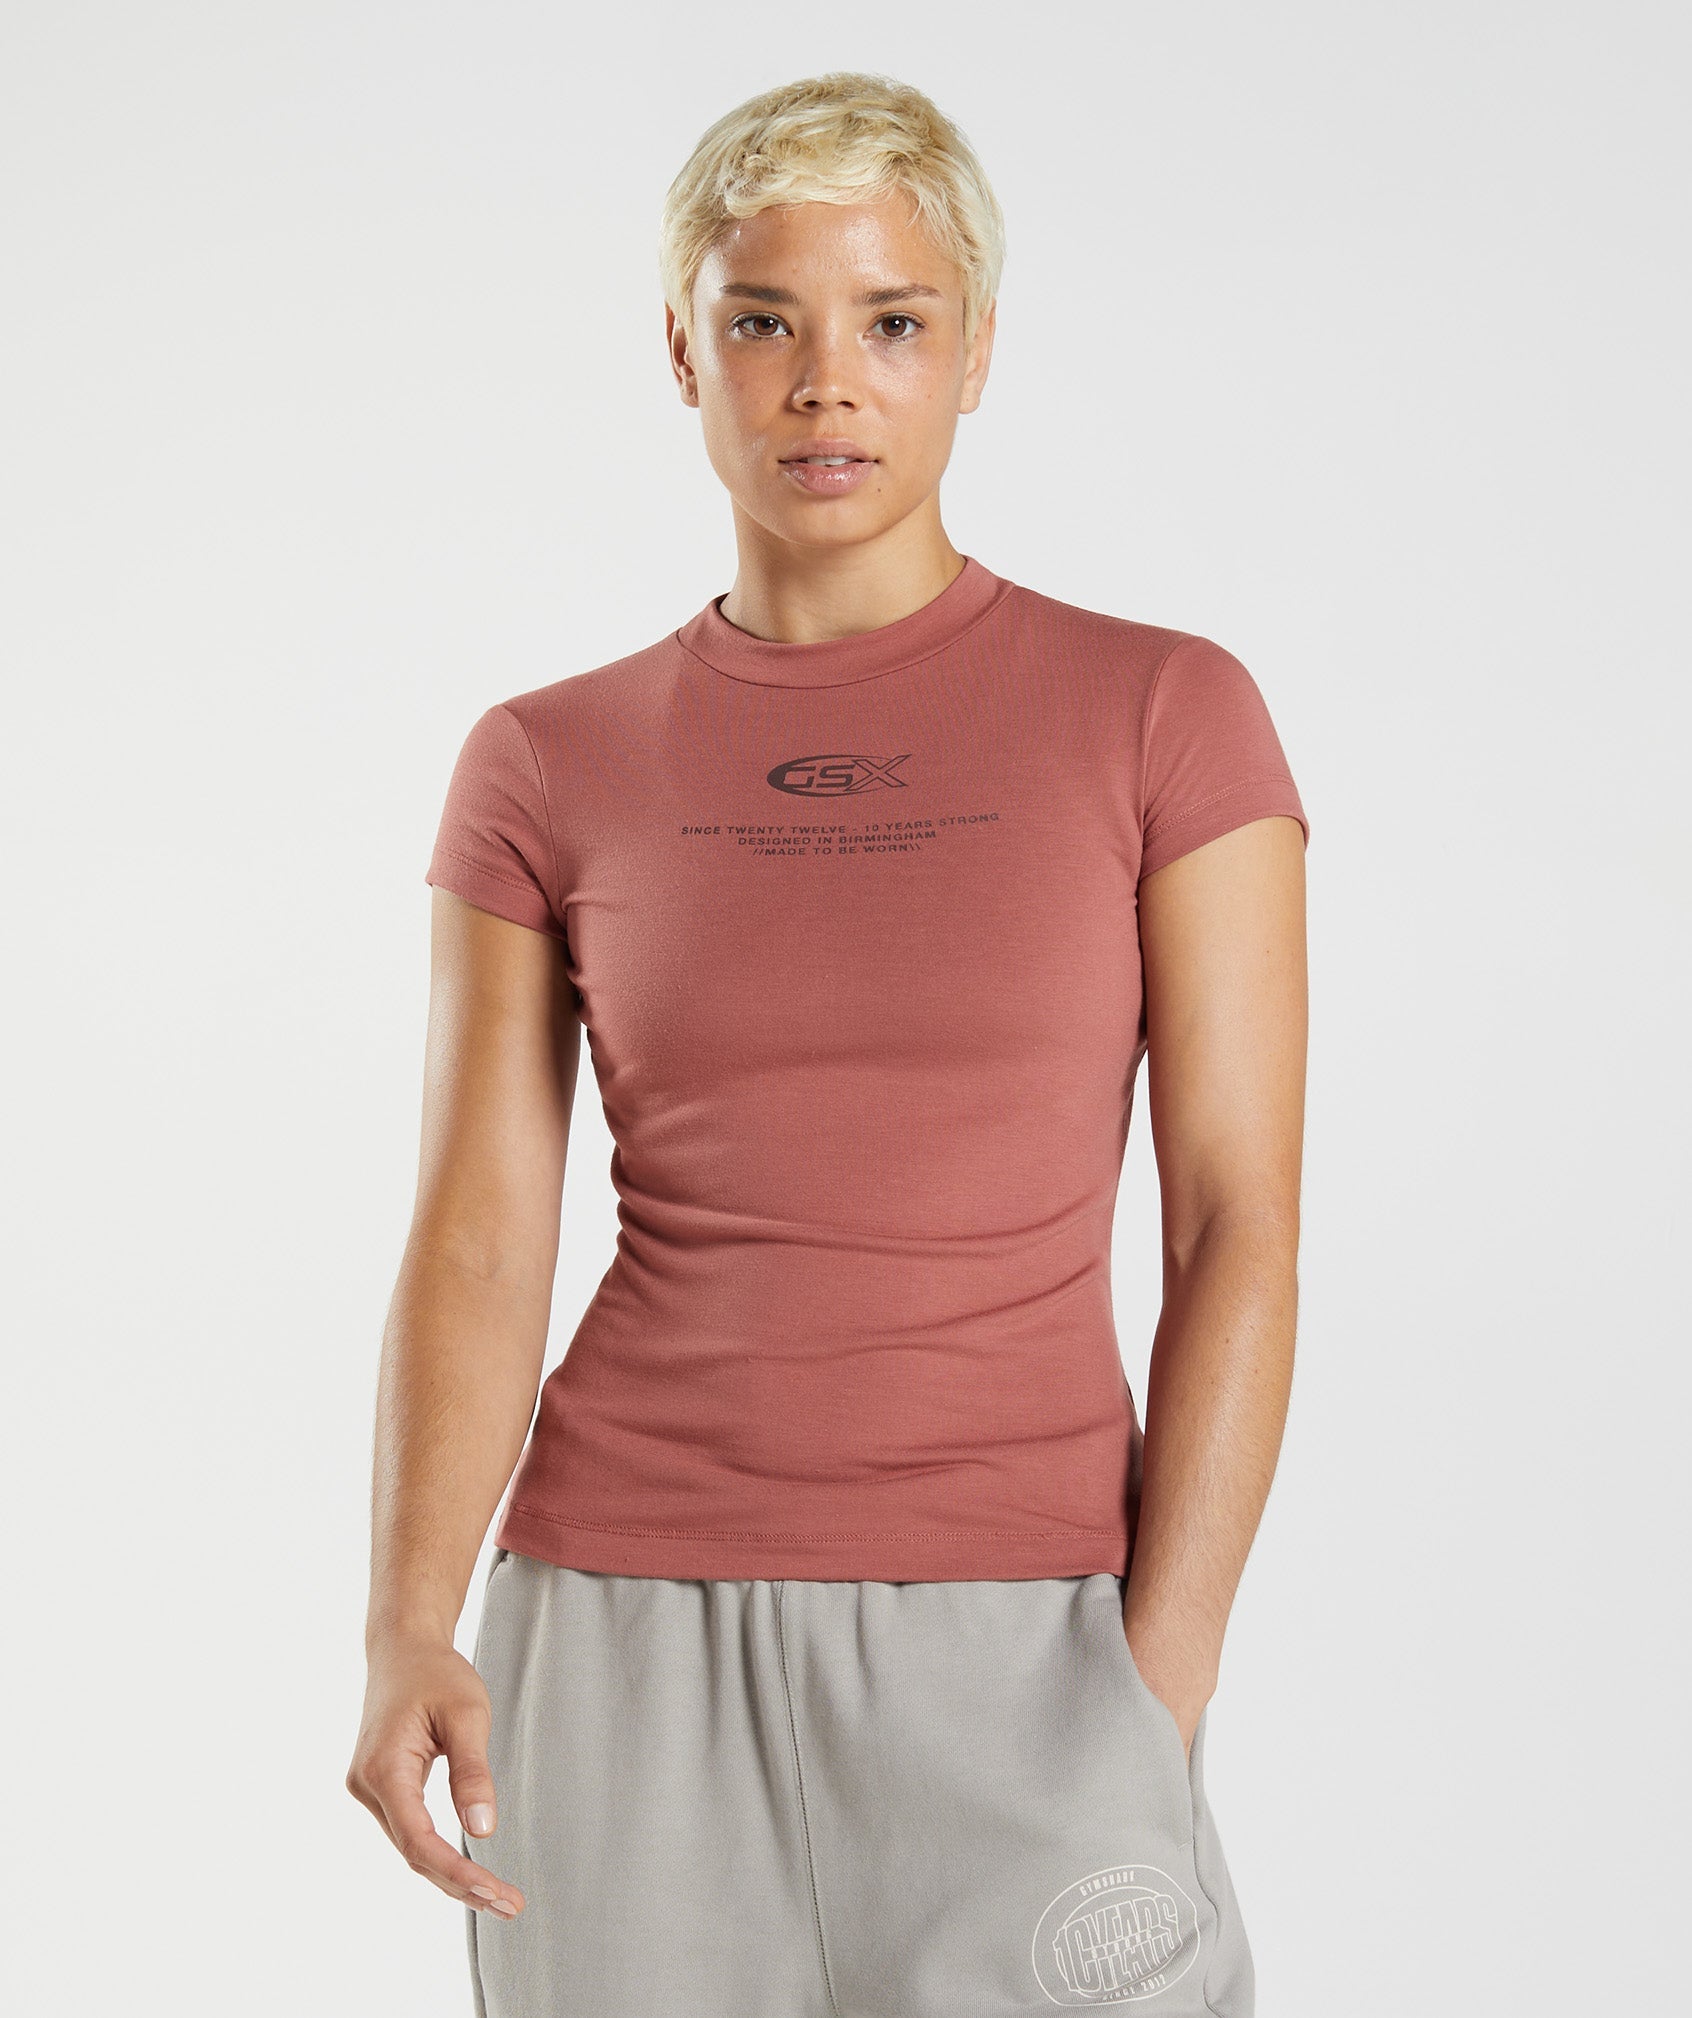 GS10 Year Body Fit T-Shirt